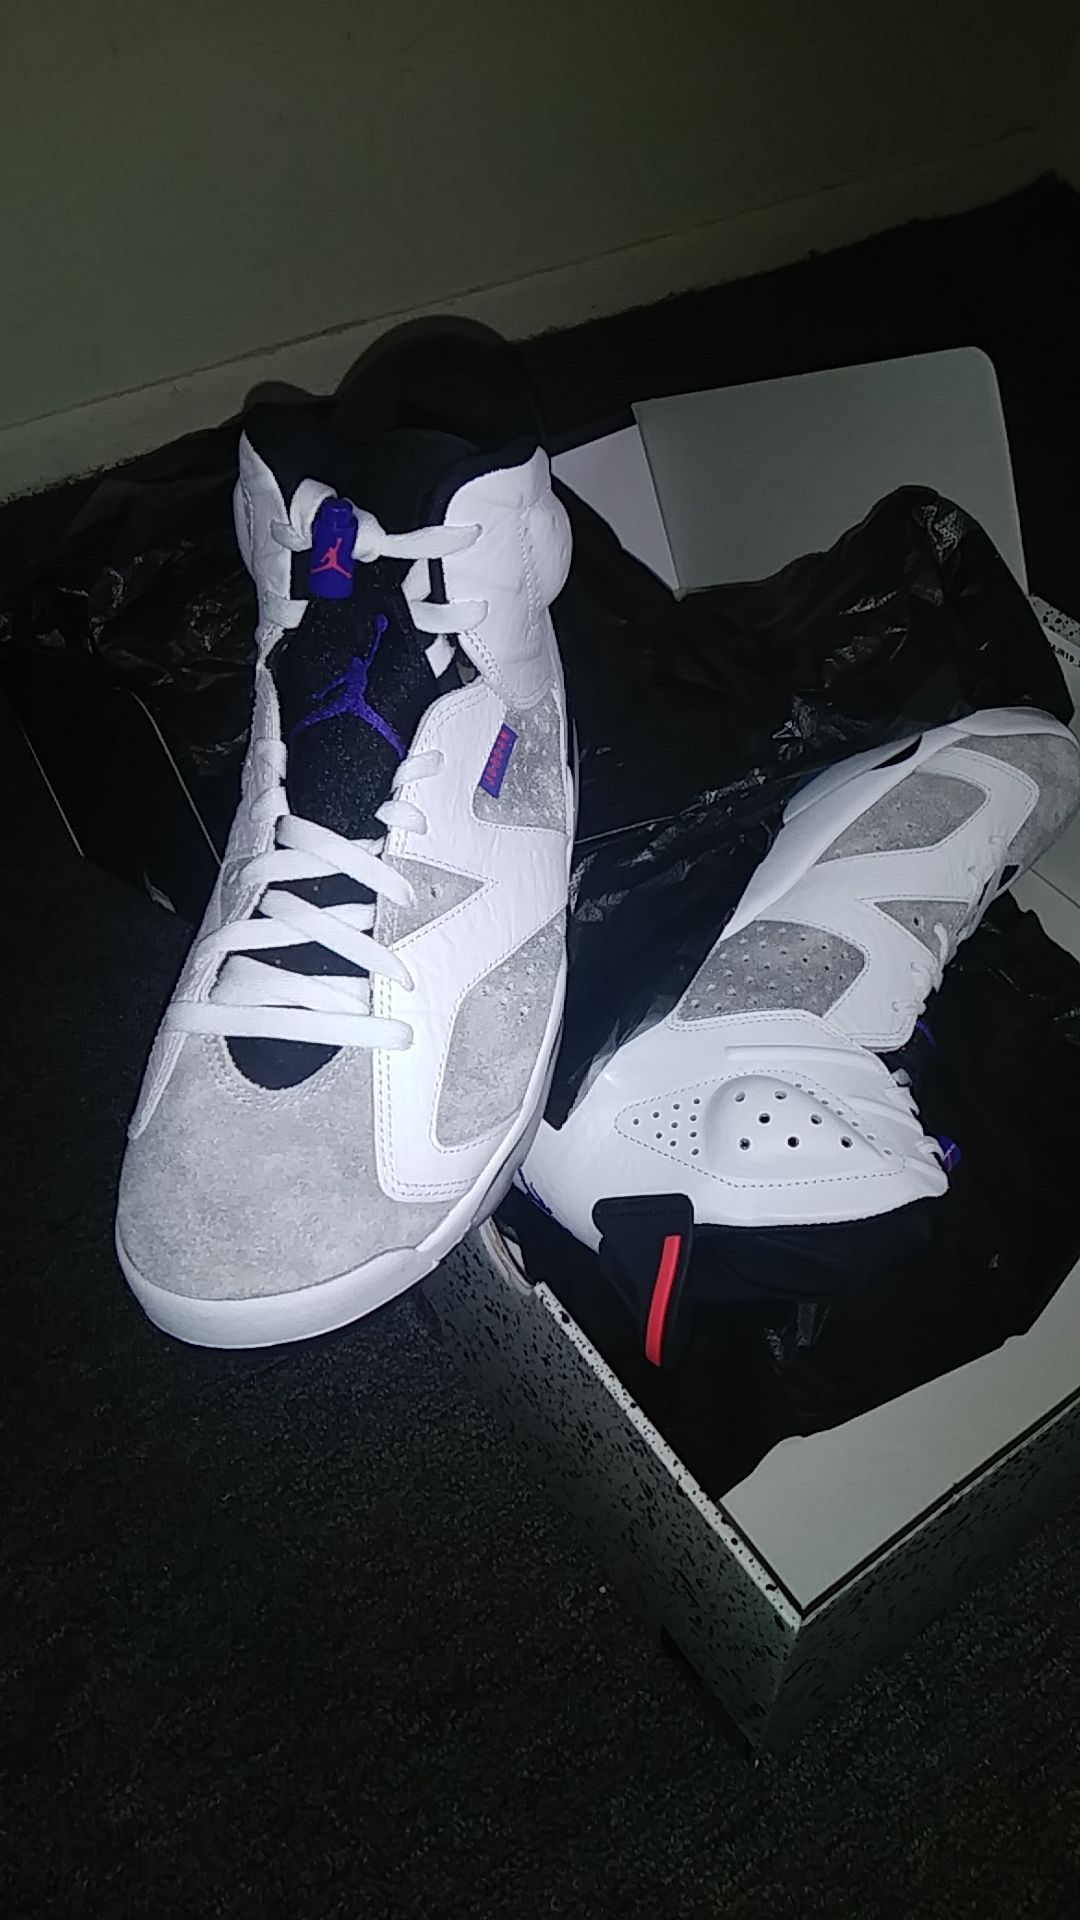 Jordan 6s Brand New Never Worn 9half Men First Come first serve. In Box{contact info removed}{contact info removed}